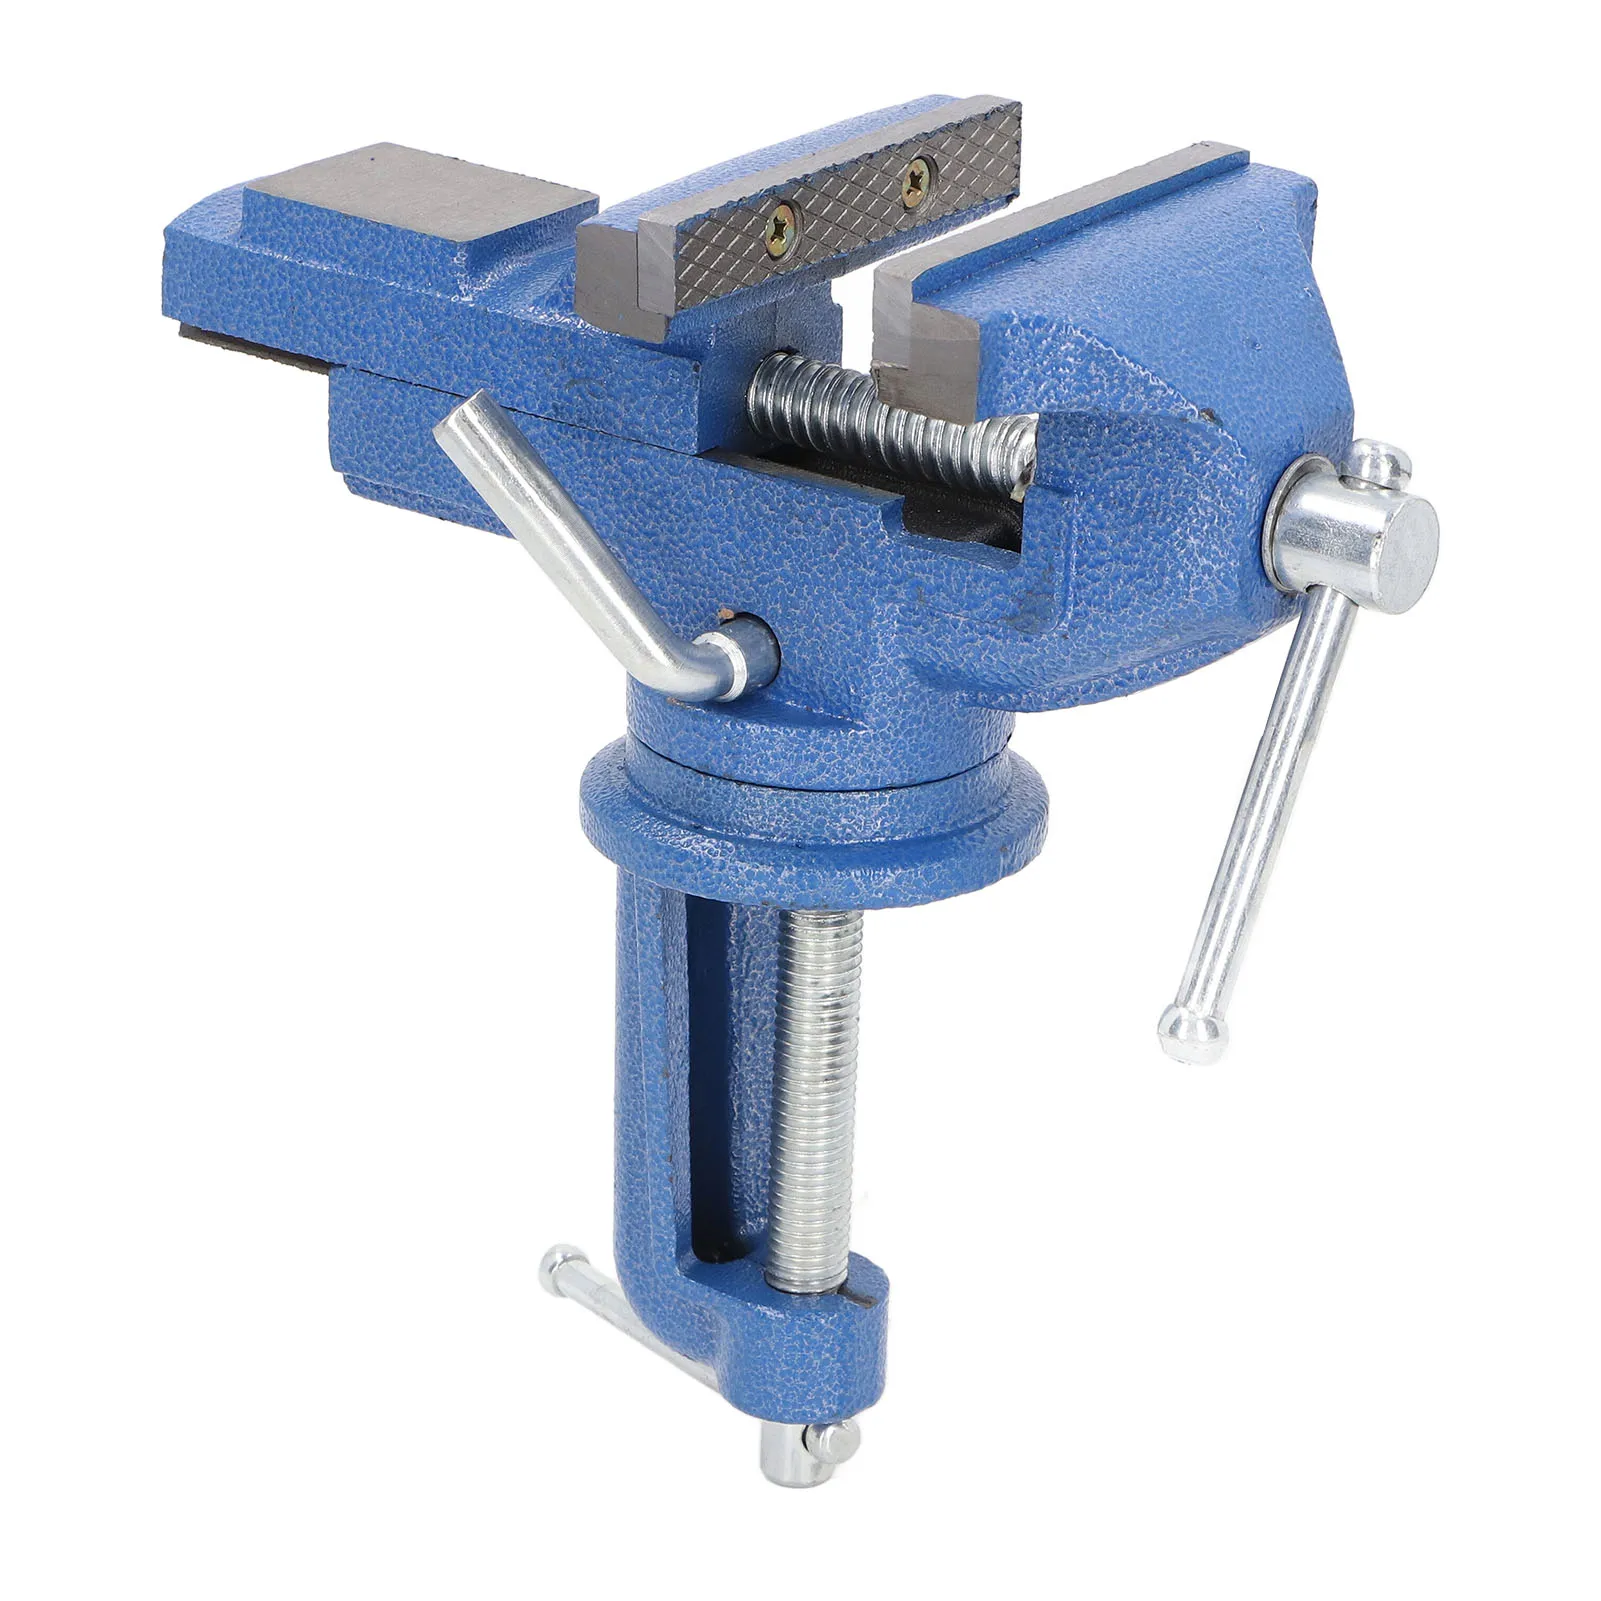 

Firm Clamping Bench Vise Heavy Duty 80mm Jaw High Hardness 360 Degree Rotation Universal Table Vise Clamp